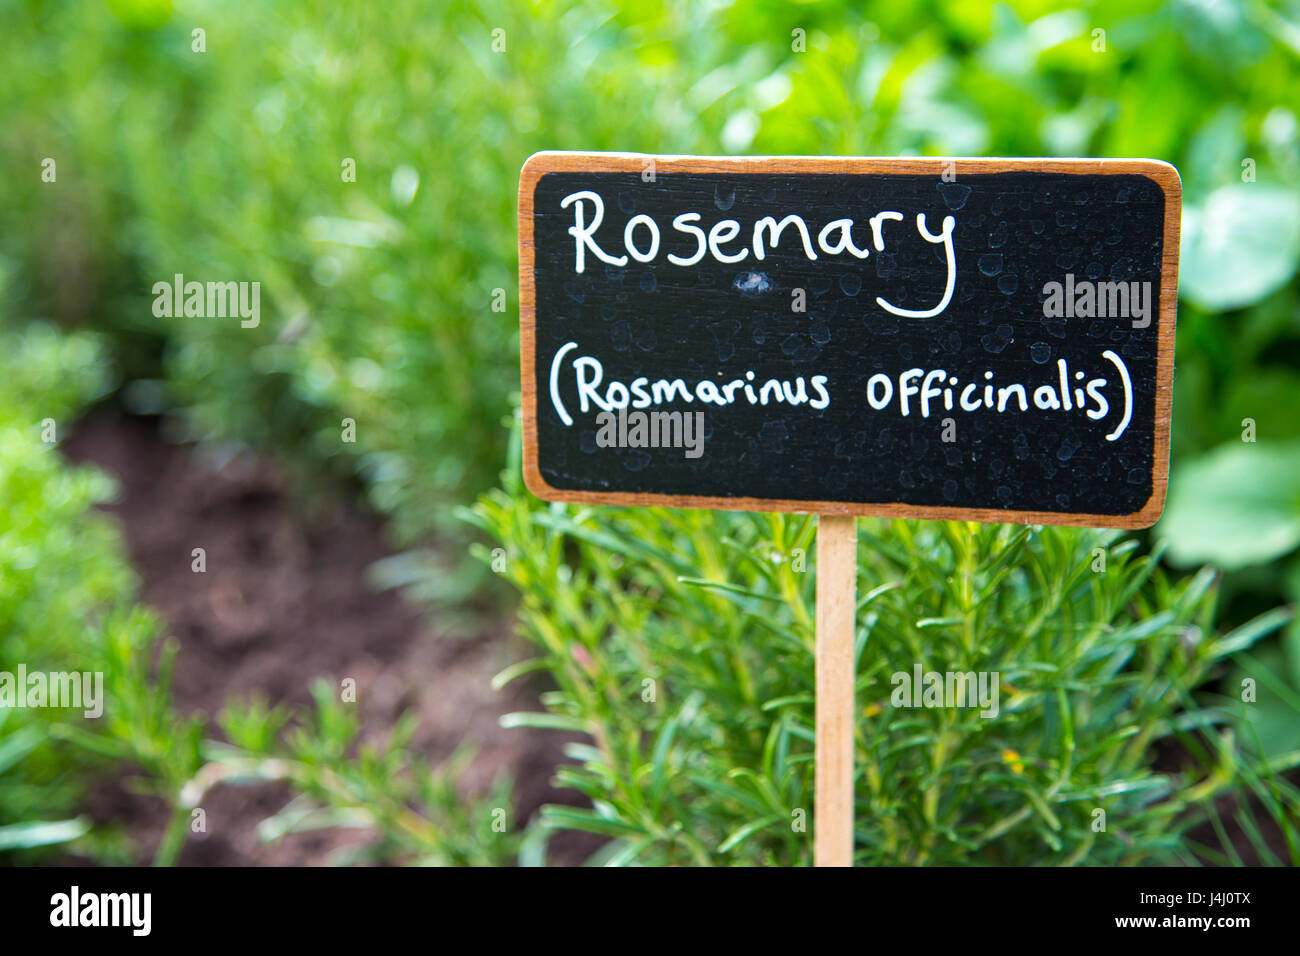 Label for Rosemary (Rosmarinus Officinalis) in the garden Stock Photo